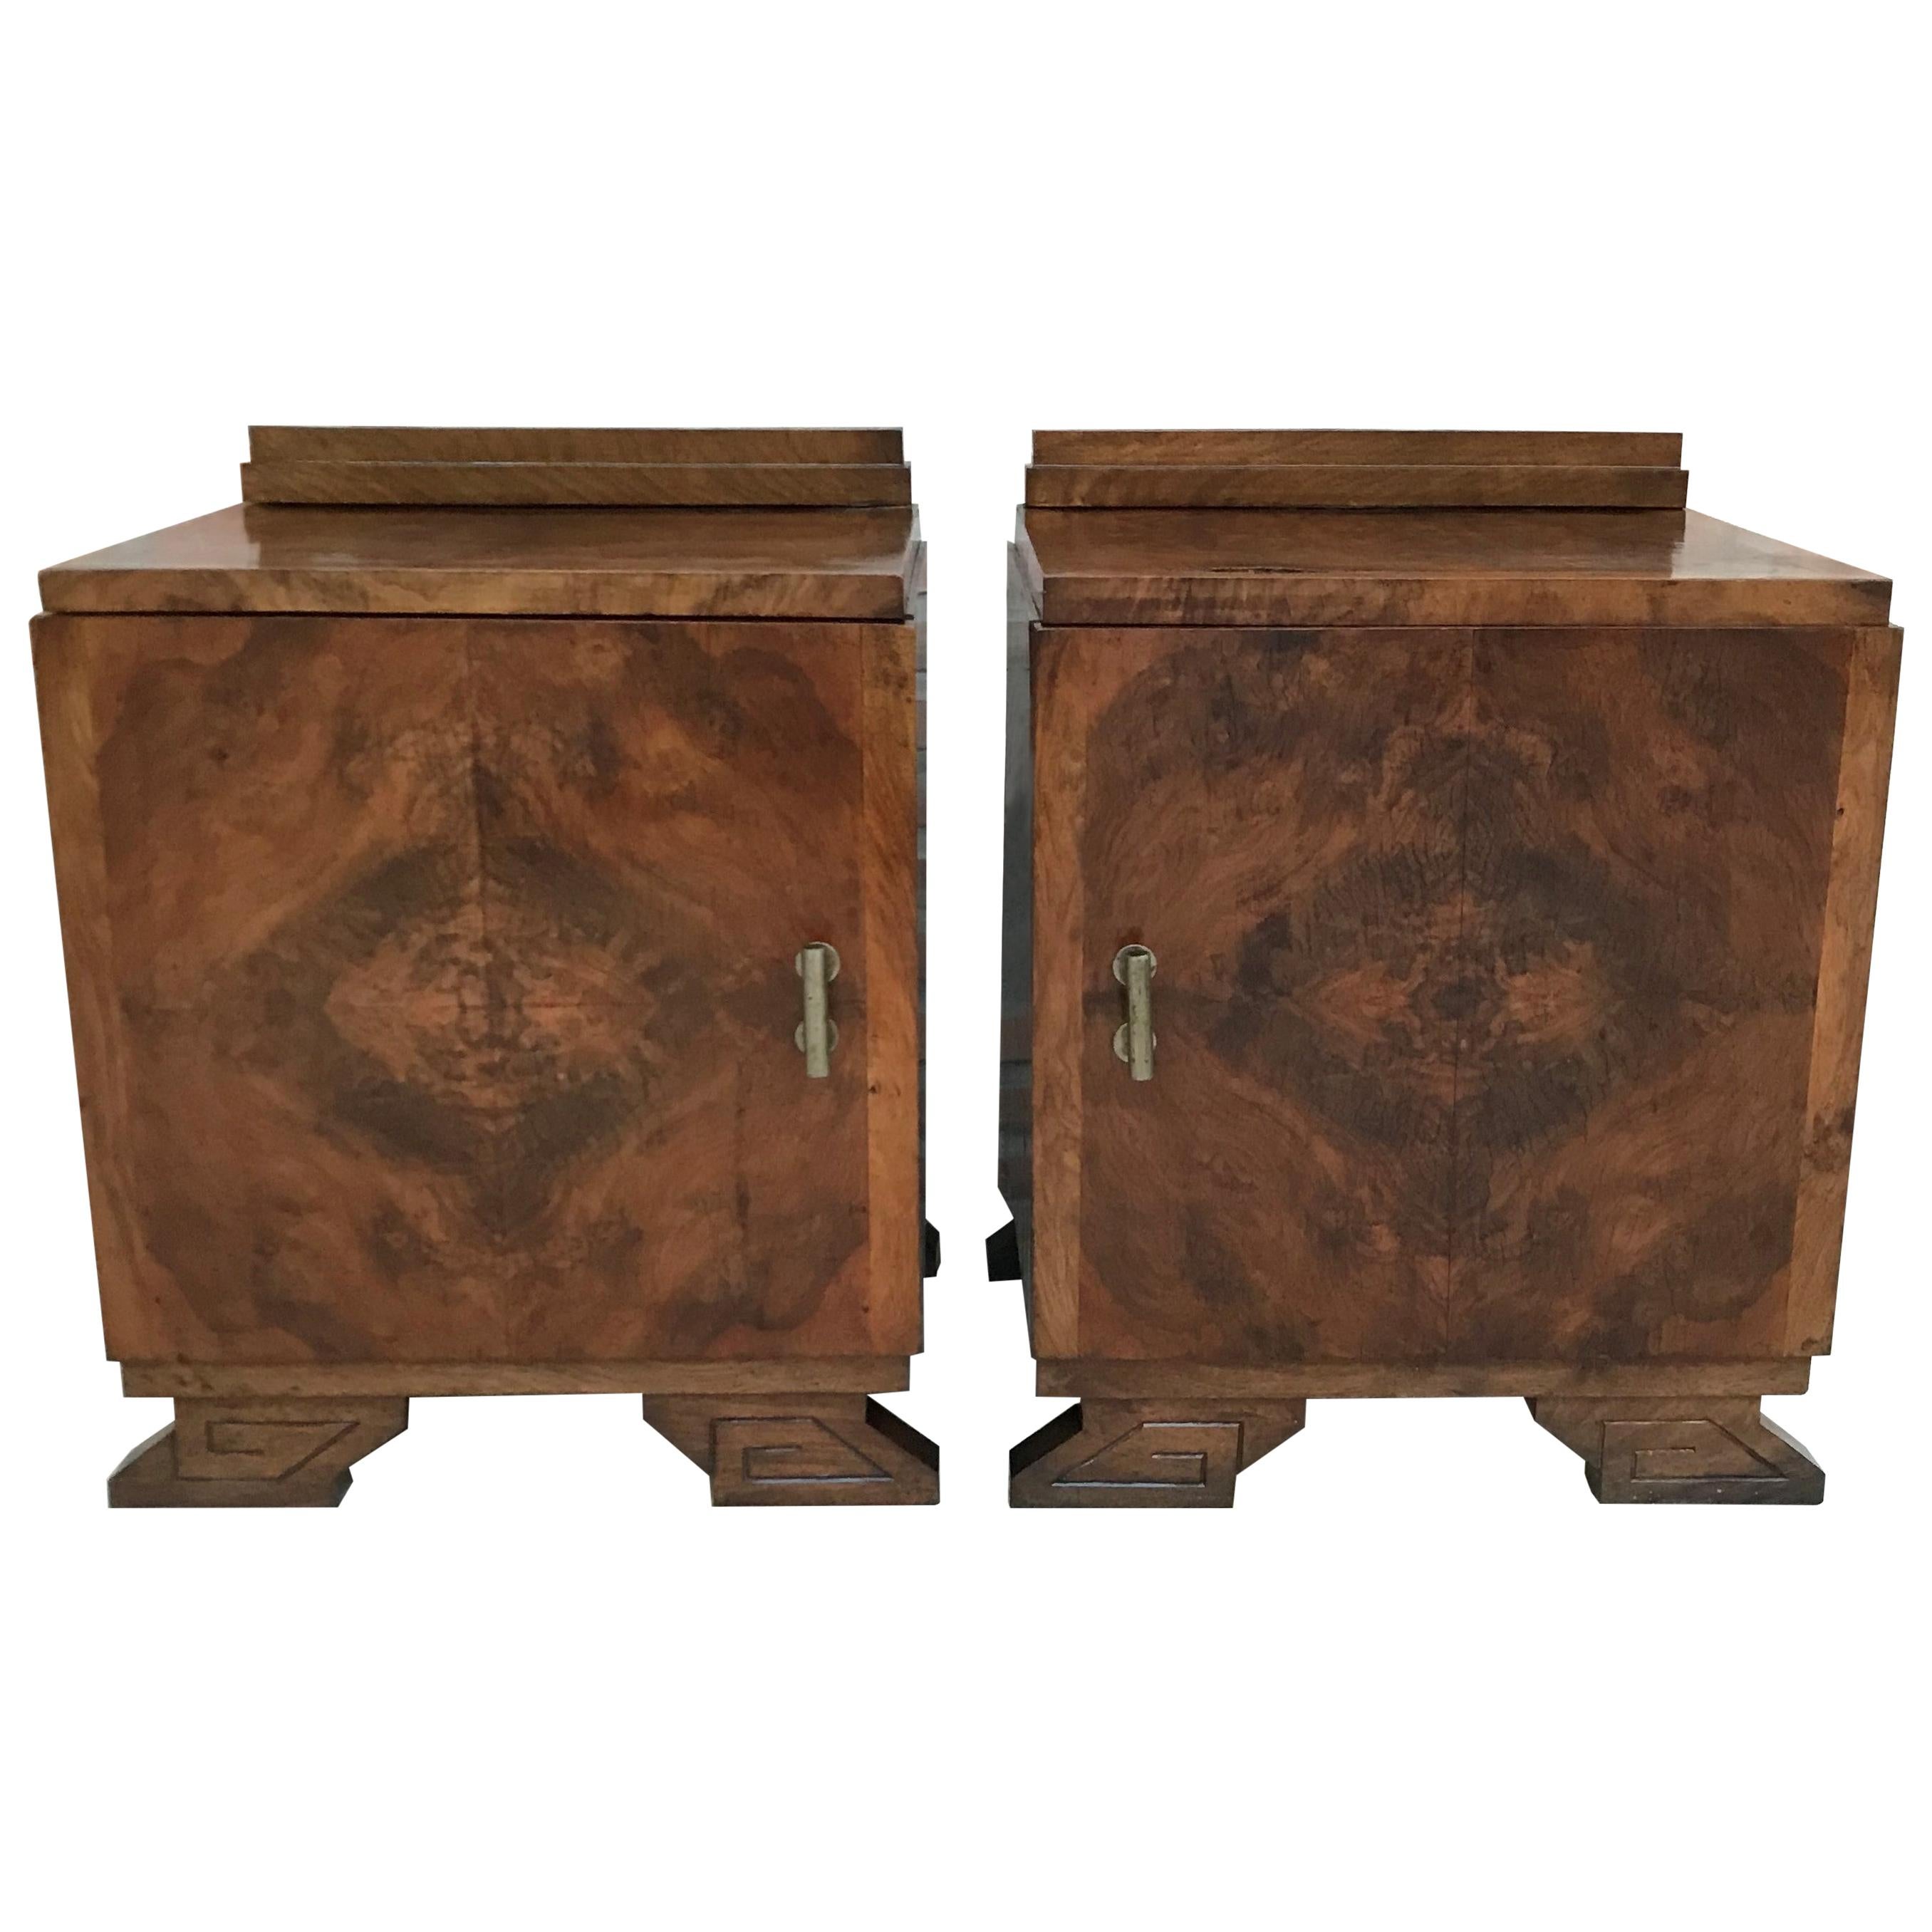 Pair of Art Deco Side Cabinets or Nightstands with Ebonized Base and Crest